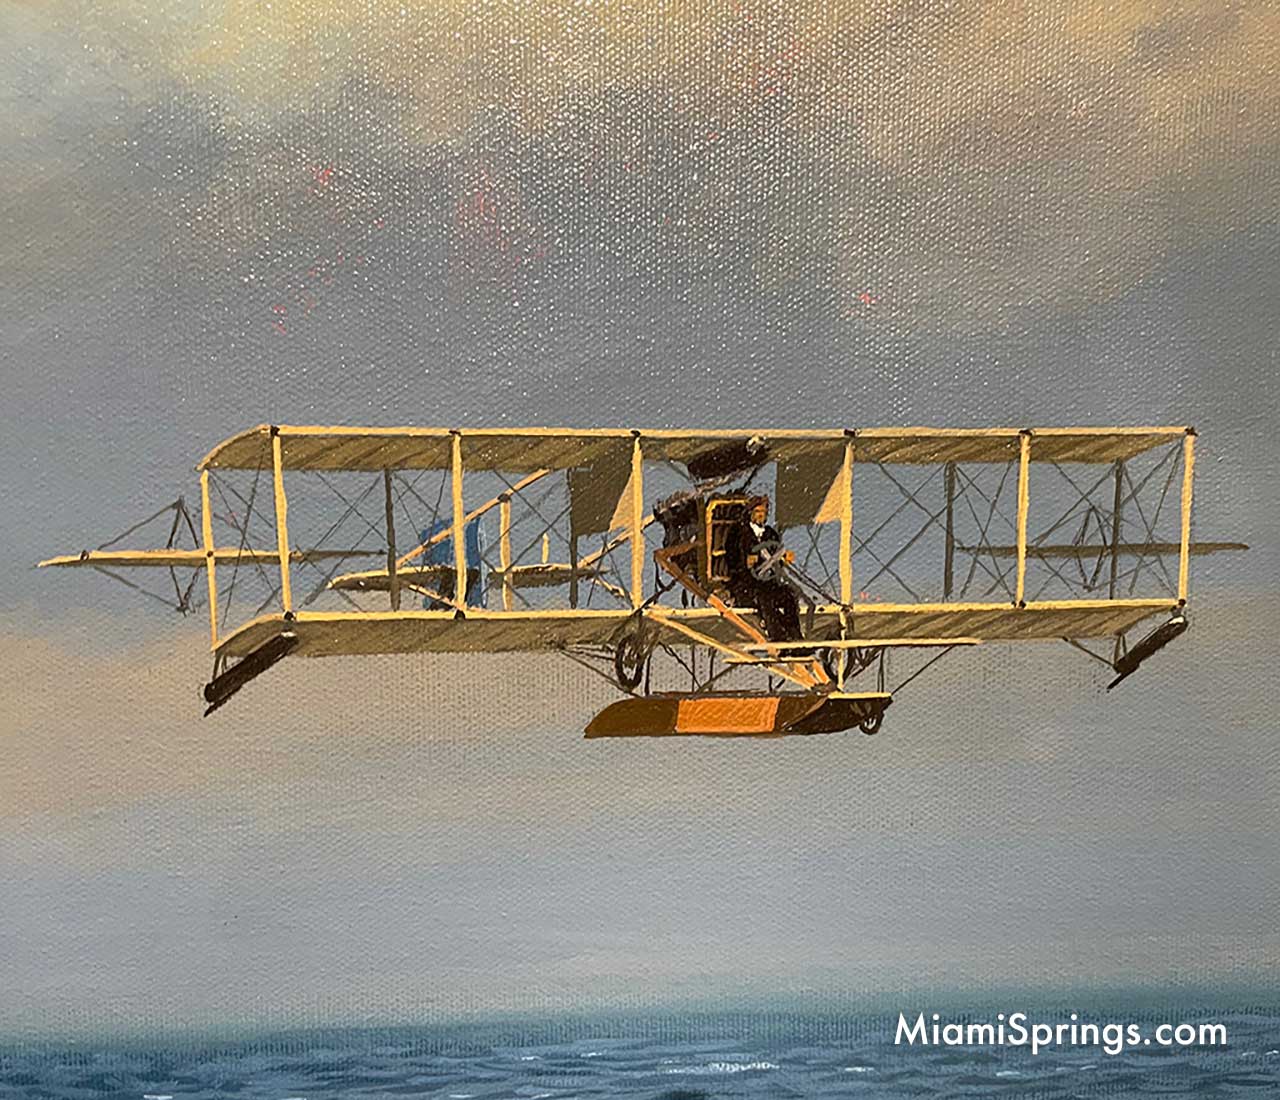 Painting featuring a Curtiss A-1 Triad at the National Naval Aviation Museum in Pensacola, Florida